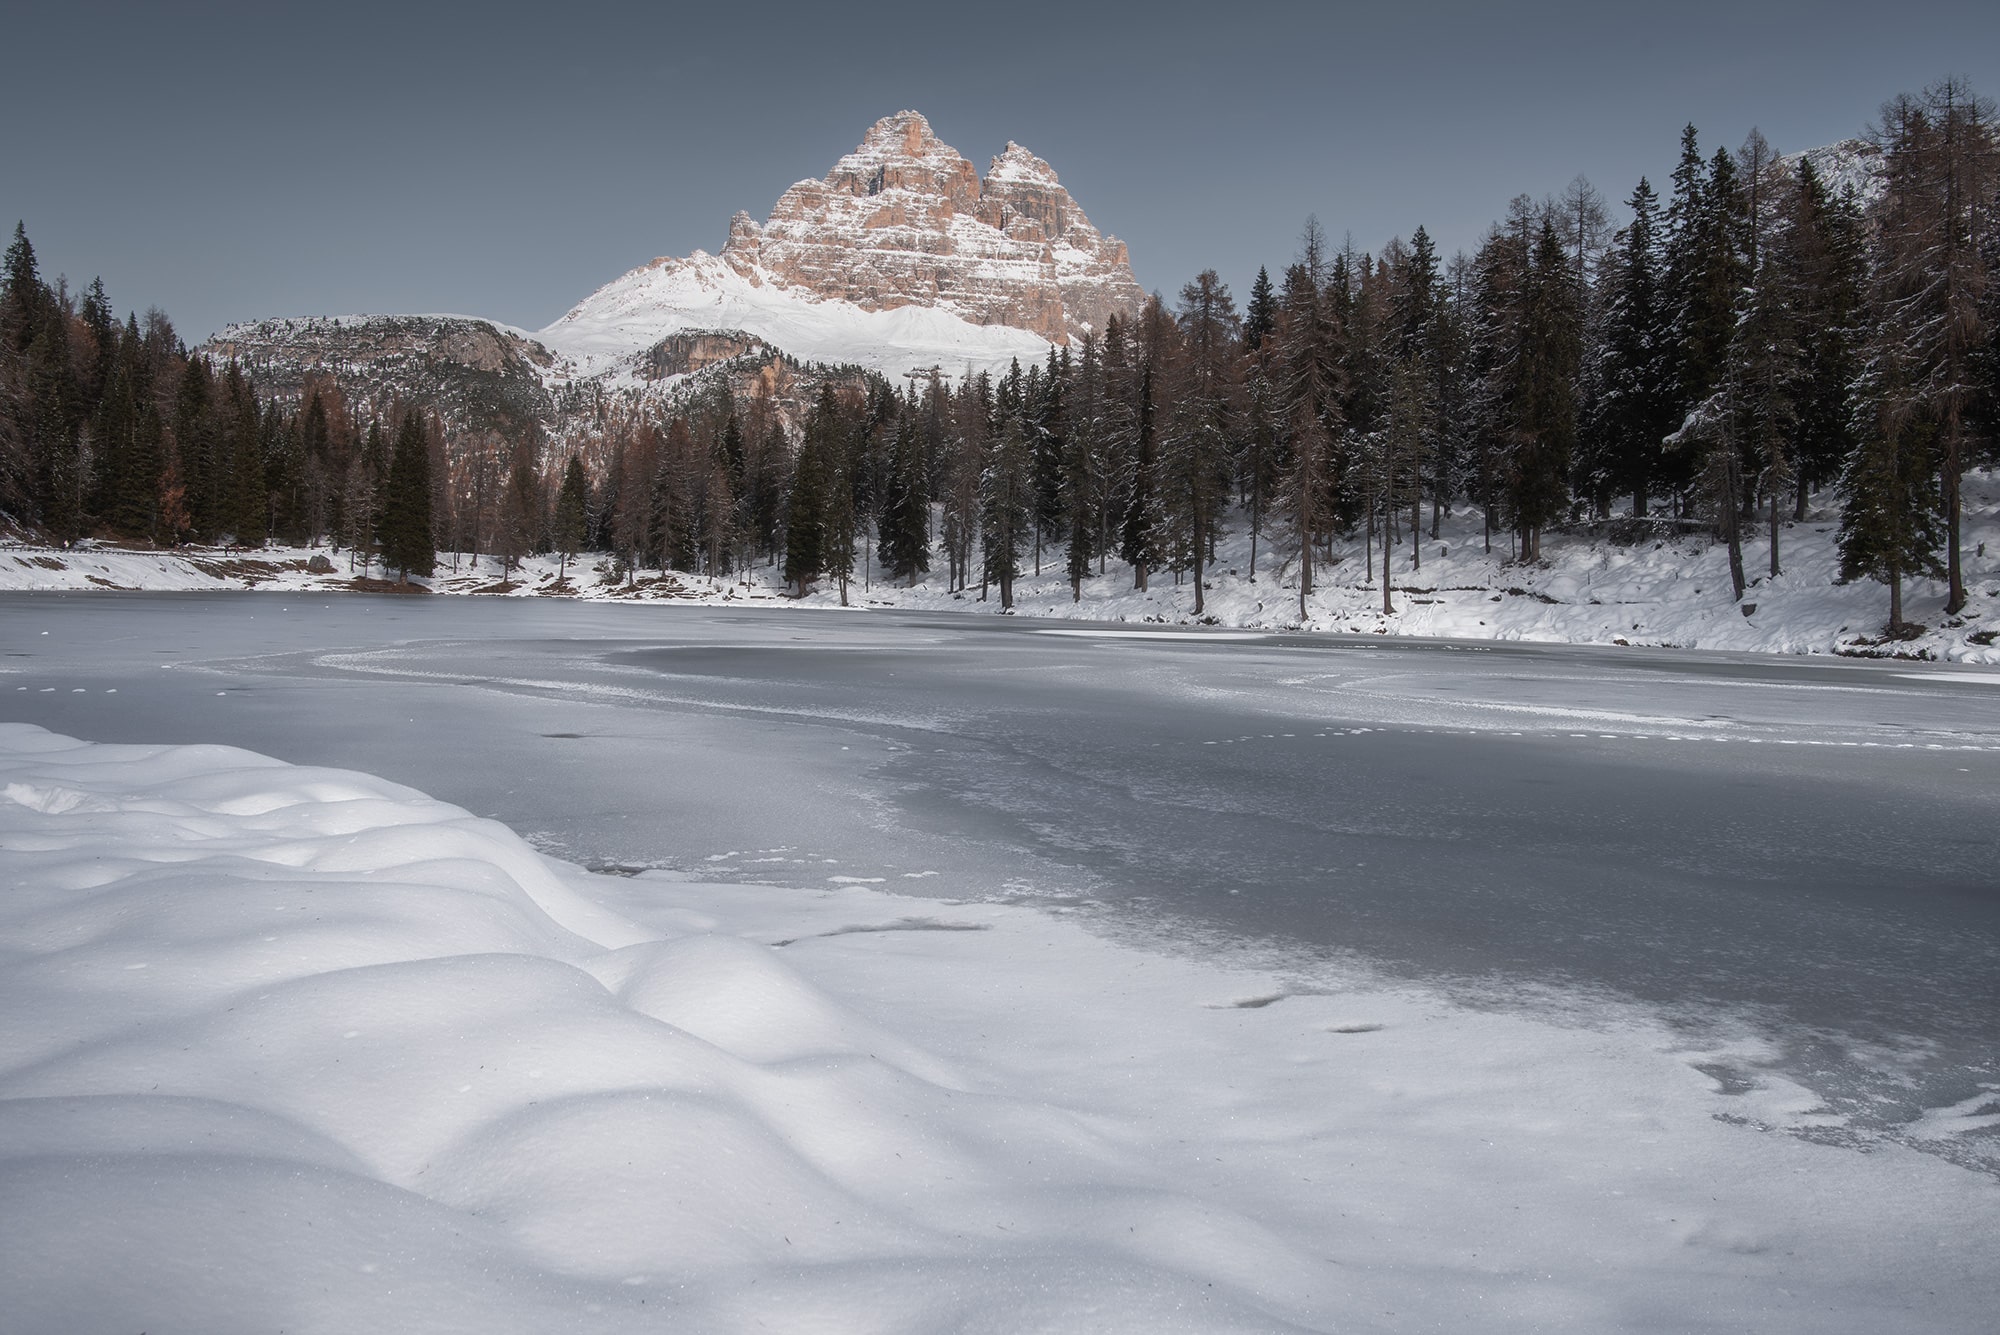 Experience the breathtaking beauty of the frozen Lago Antorno in the Dolomites, captured during the winter season by Swiss photographer Jennifer Esseiva. This stunning landscape photography showcases the serene and icy landscape of Lago Antorno, offering a glimpse into the wondrous winter scenery of the Dolomites.